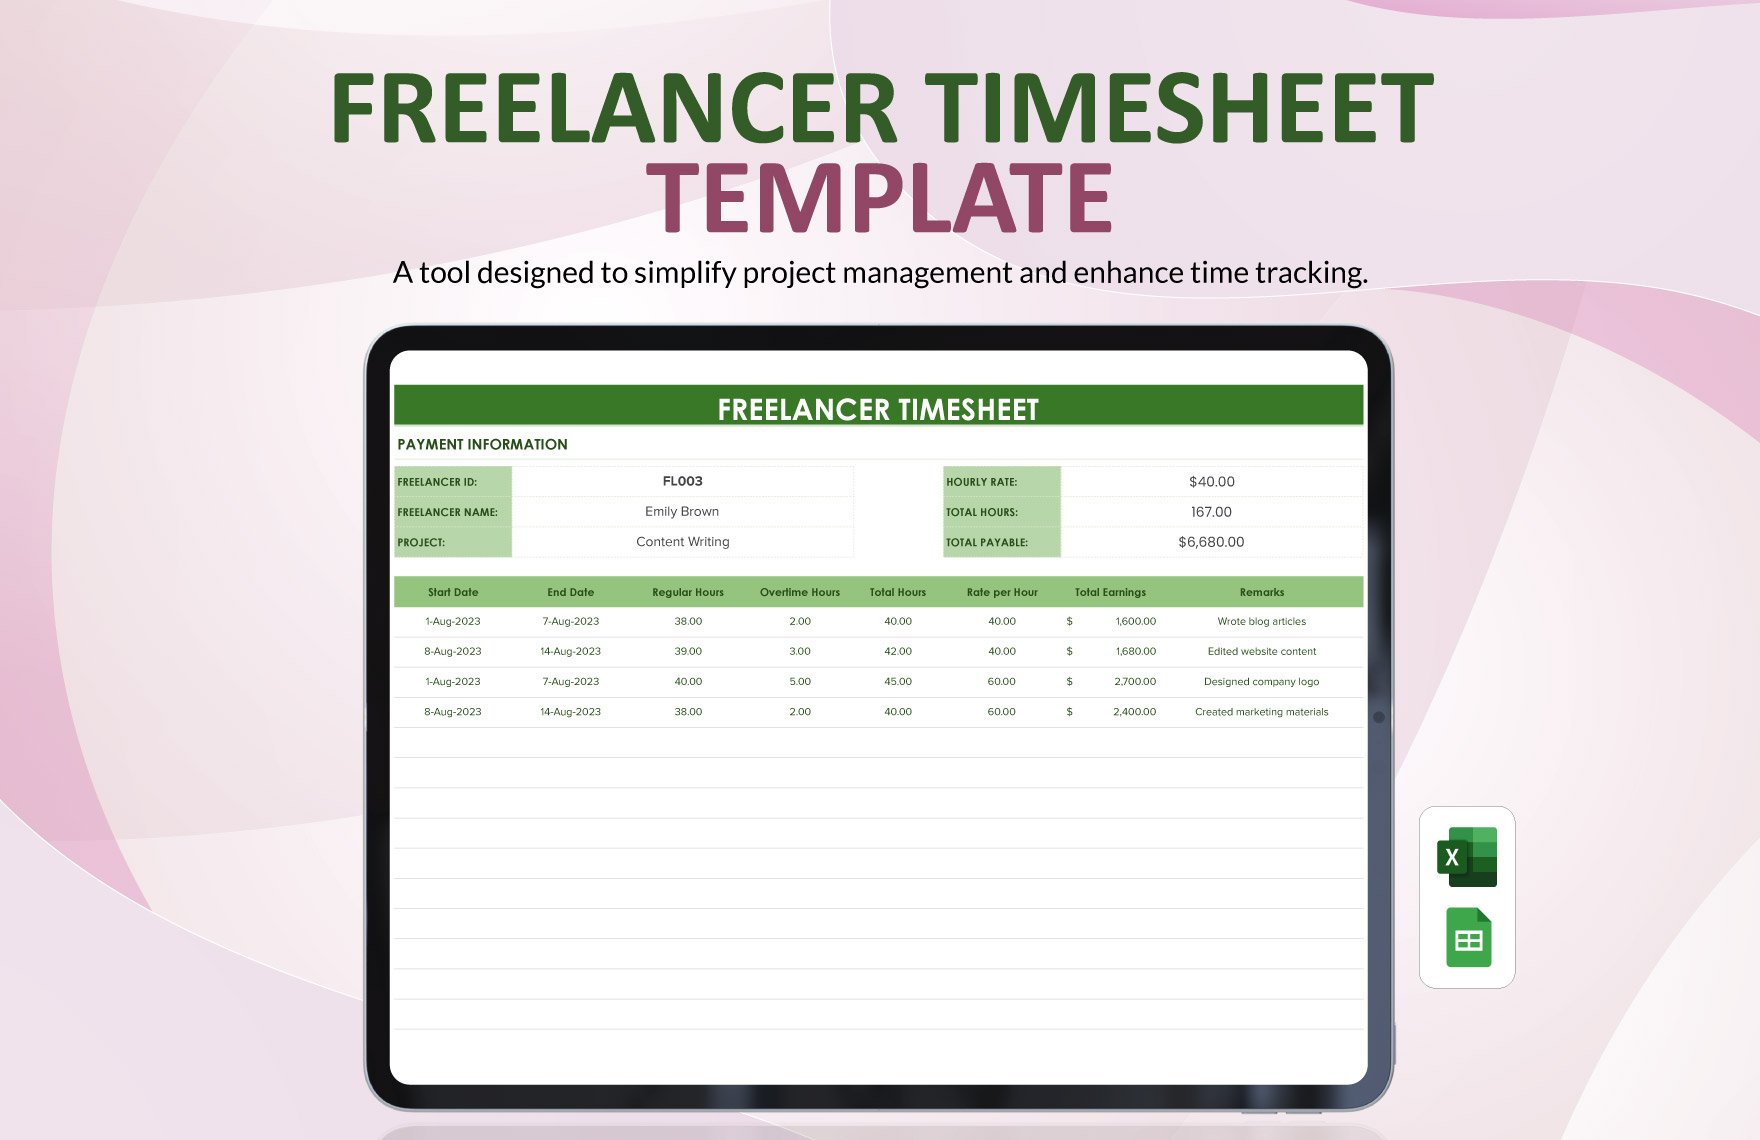 Freelancer Timesheet Template in Excel, Google Sheets